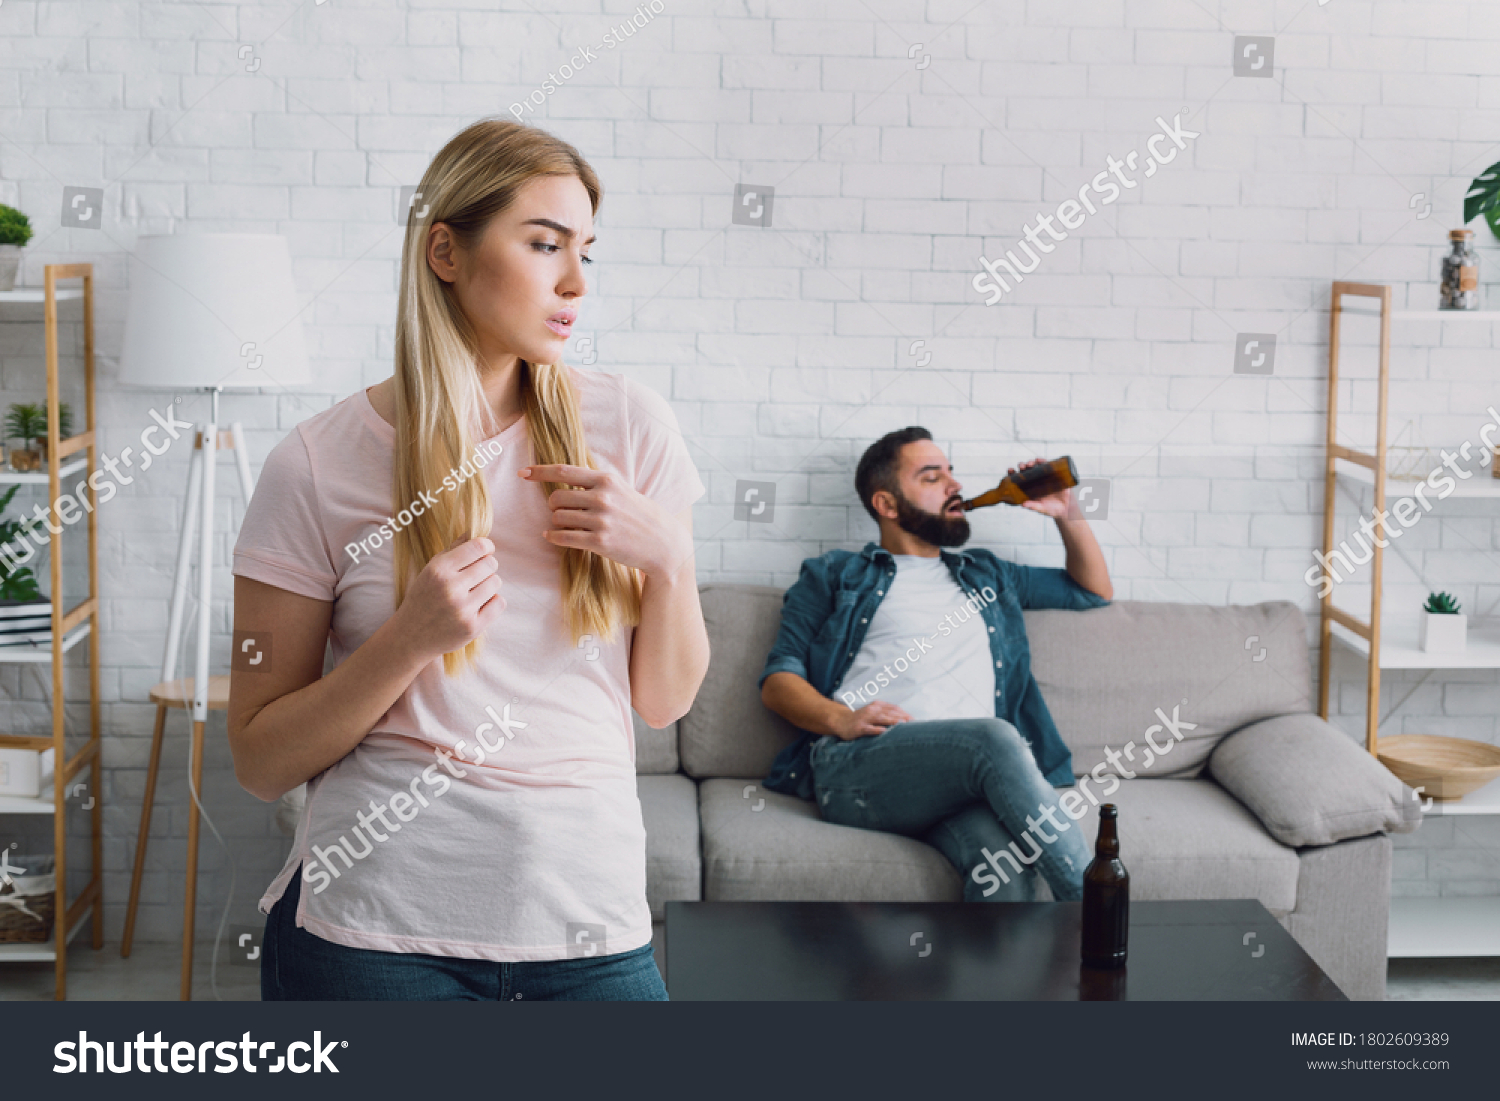 Latent alcoholism. Sad wife sees her husband drinking a lot of beer, man with beard sits on couch, near table with empty bottles #1802609389